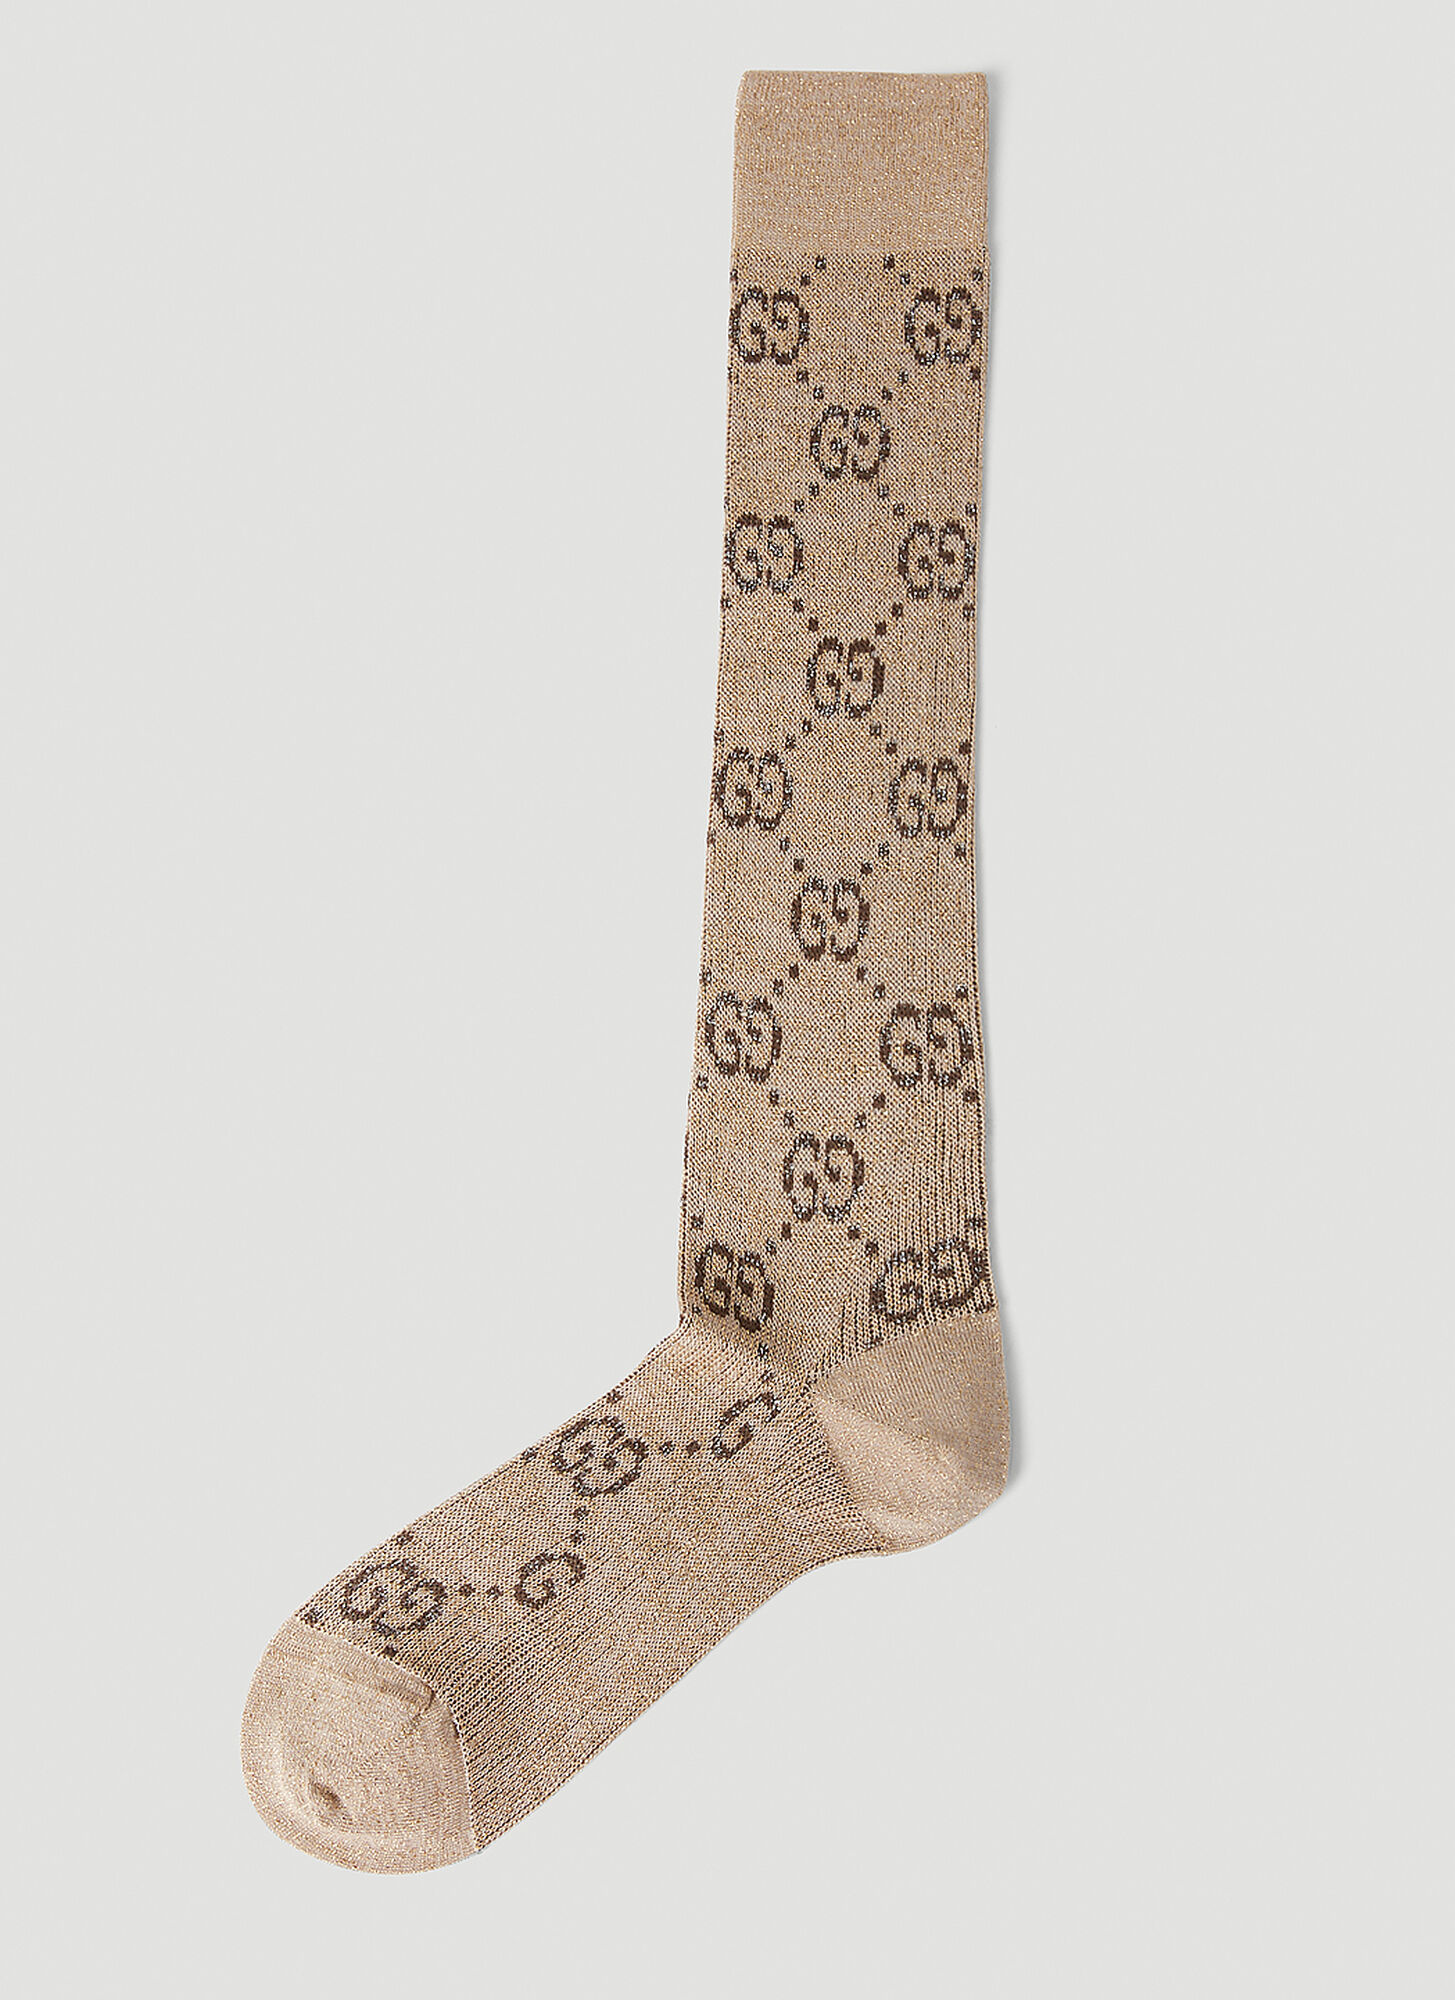 Shop GUCCI 2022 SS Socks & Tights by jinielee75